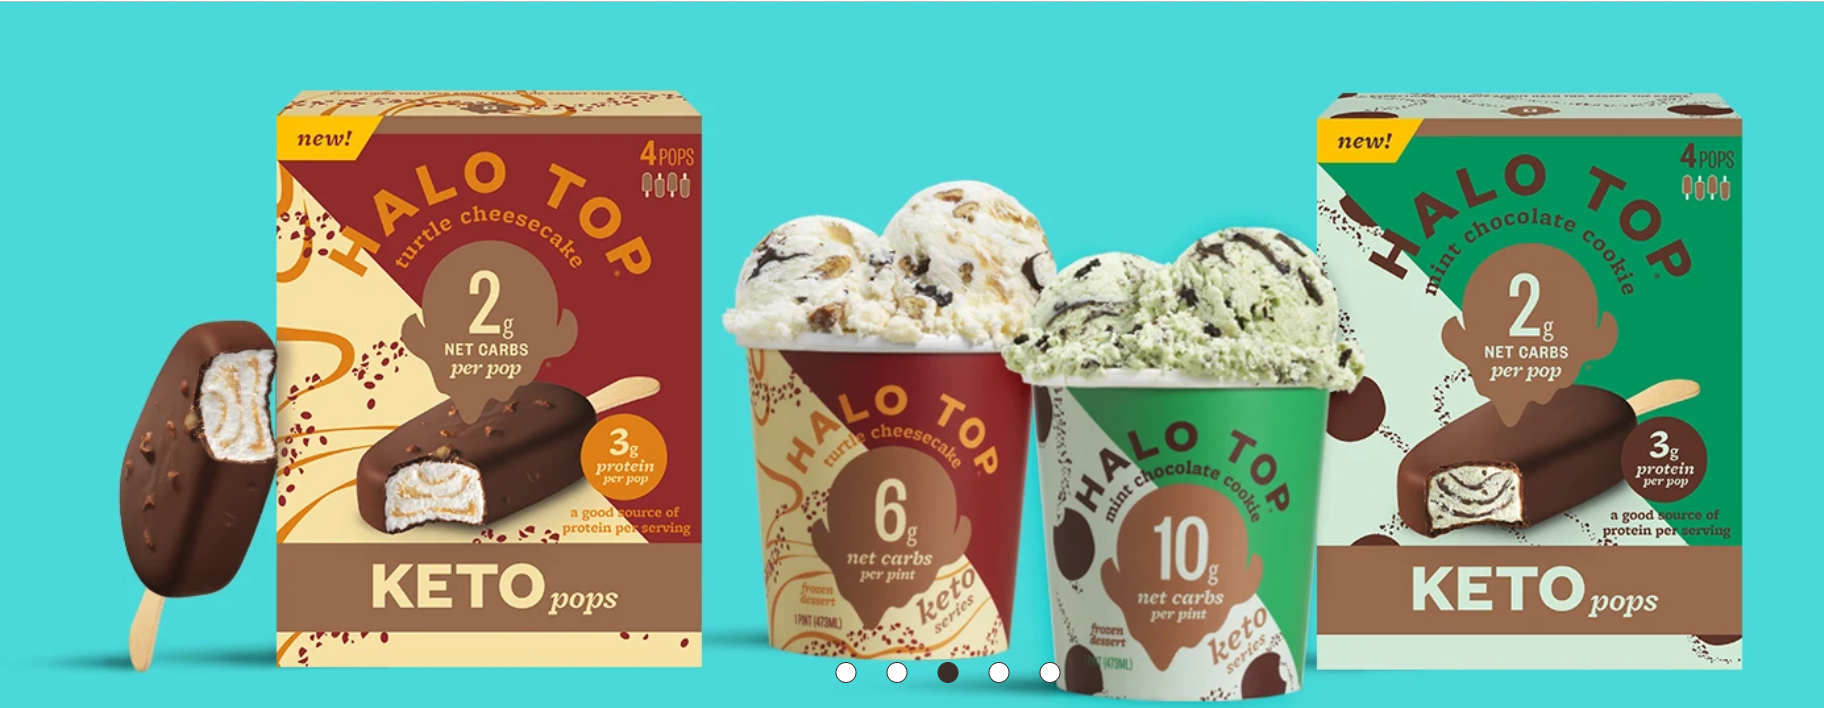 Halo Top Creamery's Packaging Example